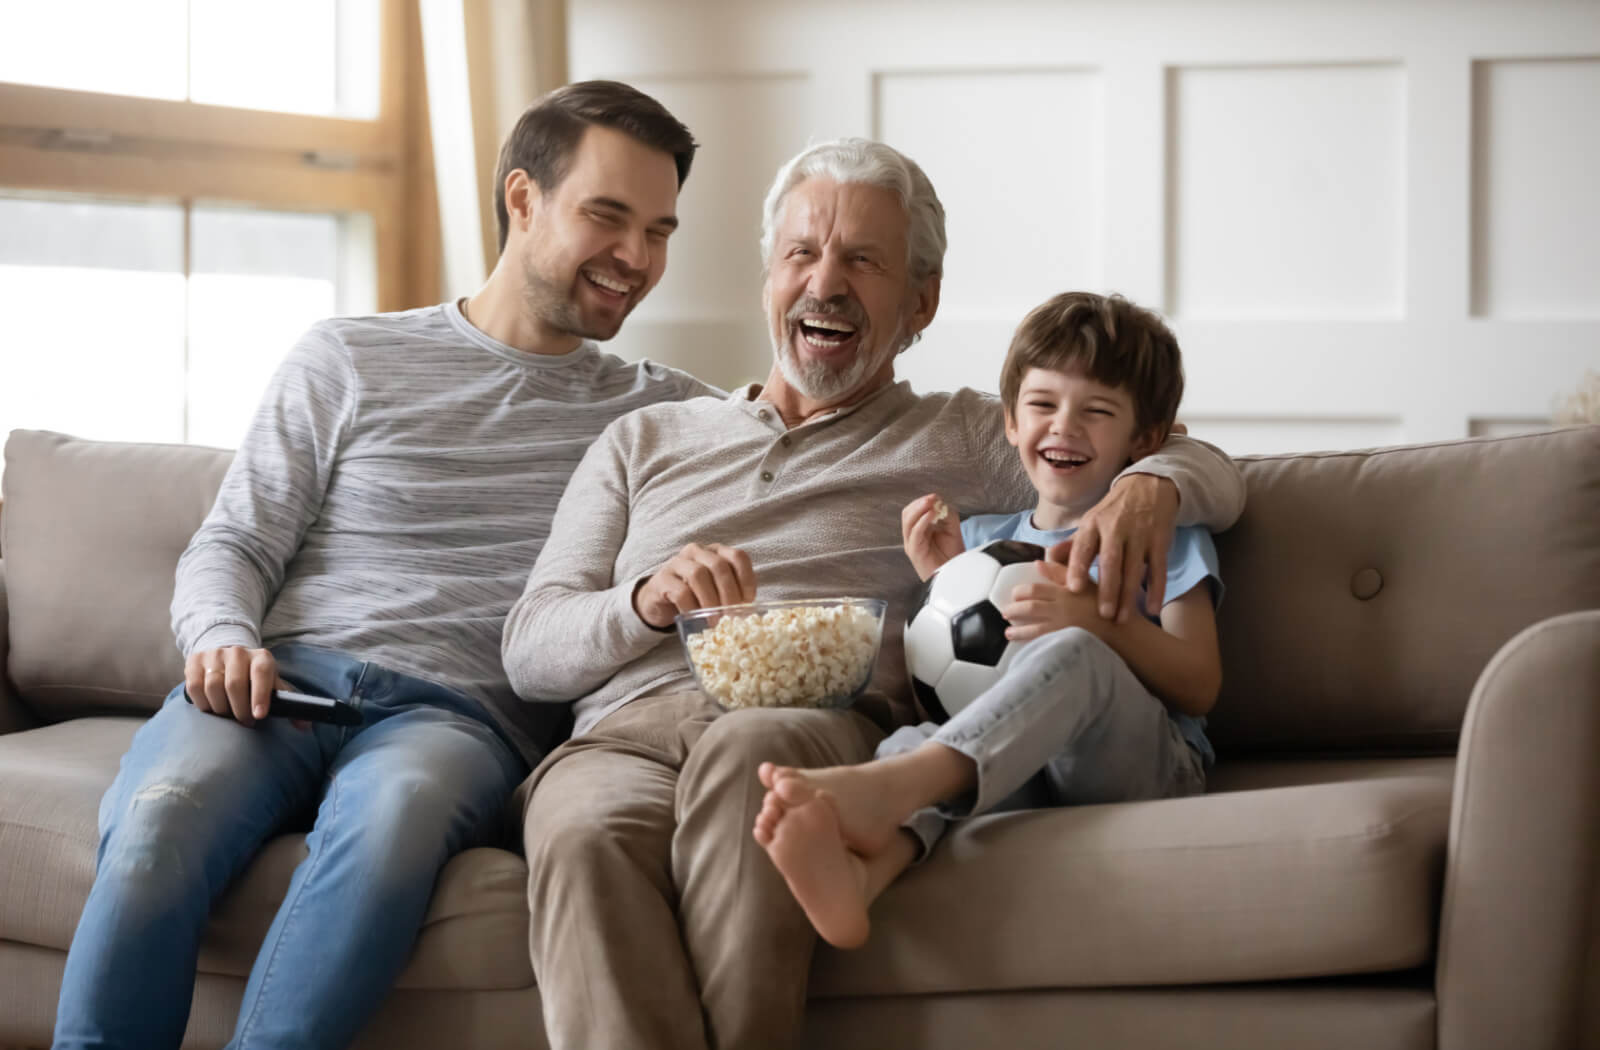 A man visiting his older adult father with his young son; all of them are having a fun time watching TV.